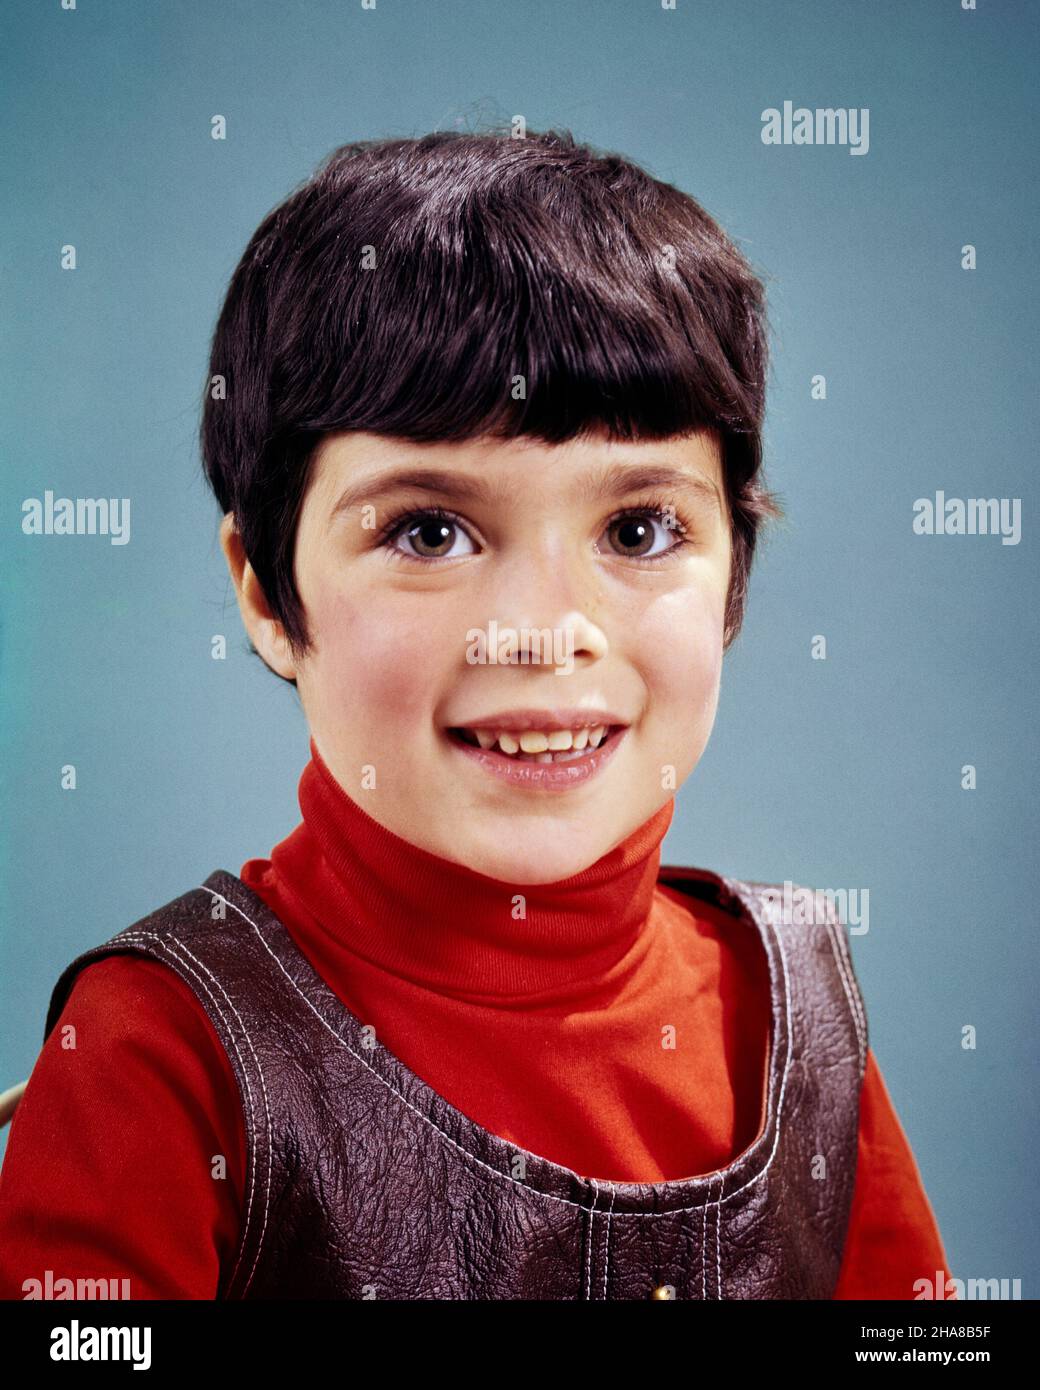 1960s CUTE BRUNETTE GIRL SHORT HAIR WEARING RED TURTLENECK TOP WITH FAUX LEATHER JUMPER SMILING  - kj4183 HAR001 HARS PRETTY HAPPINESS JUMPER HEAD AND SHOULDERS CHEERFUL HAIRSTYLE SMILES FAUX JOYFUL PIXIE PLEASANT AGREEABLE BROWN EYES CHARMING JUVENILES LOVABLE PLEASING ADORABLE APPEALING BANGS CAUCASIAN ETHNICITY HAR001 OLD FASHIONED TURTLENECK Stock Photo